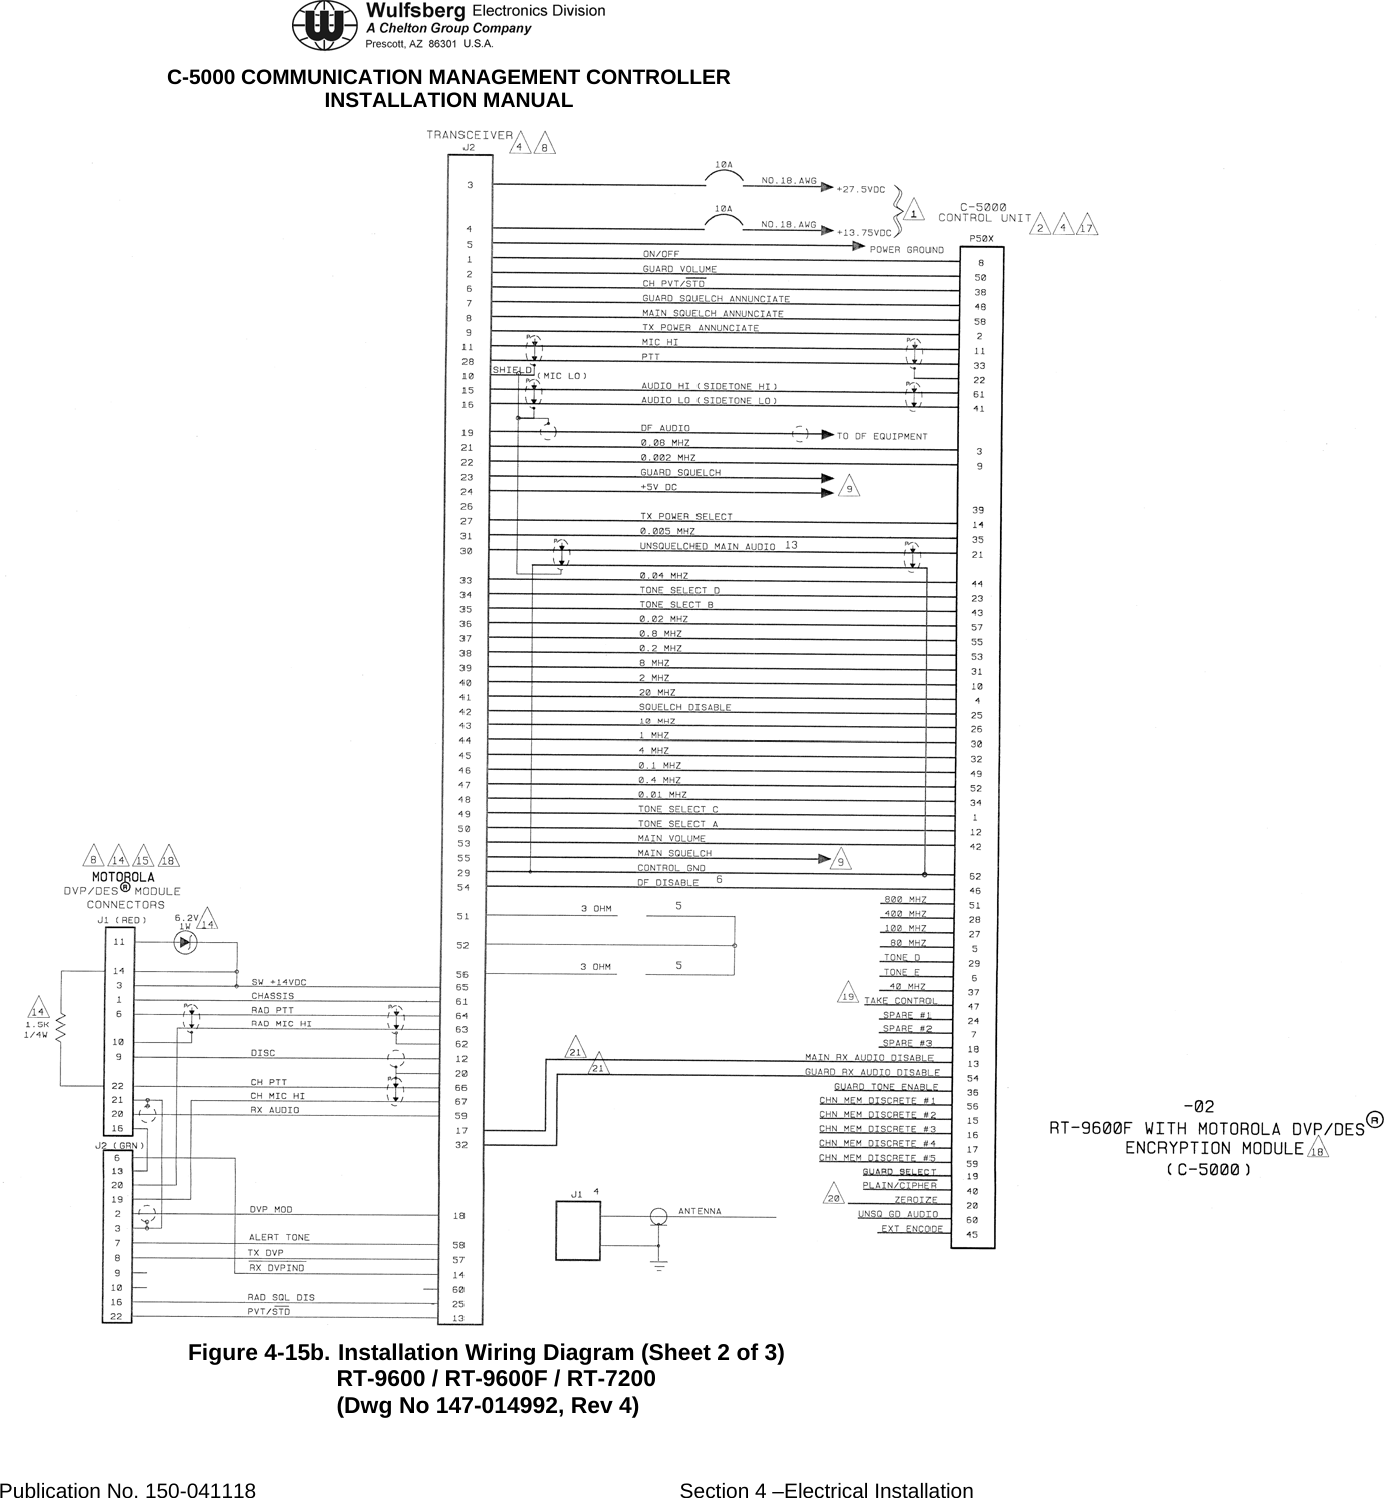  C-5000 COMMUNICATION MANAGEMENT CONTROLLER INSTALLATION MANUAL  Figure 4-15b. Installation Wiring Diagram (Sheet 2 of 3) RT-9600 / RT-9600F / RT-7200 (Dwg No 147-014992, Rev 4) Publication No. 150-041118  Section 4 –Electrical Installation 